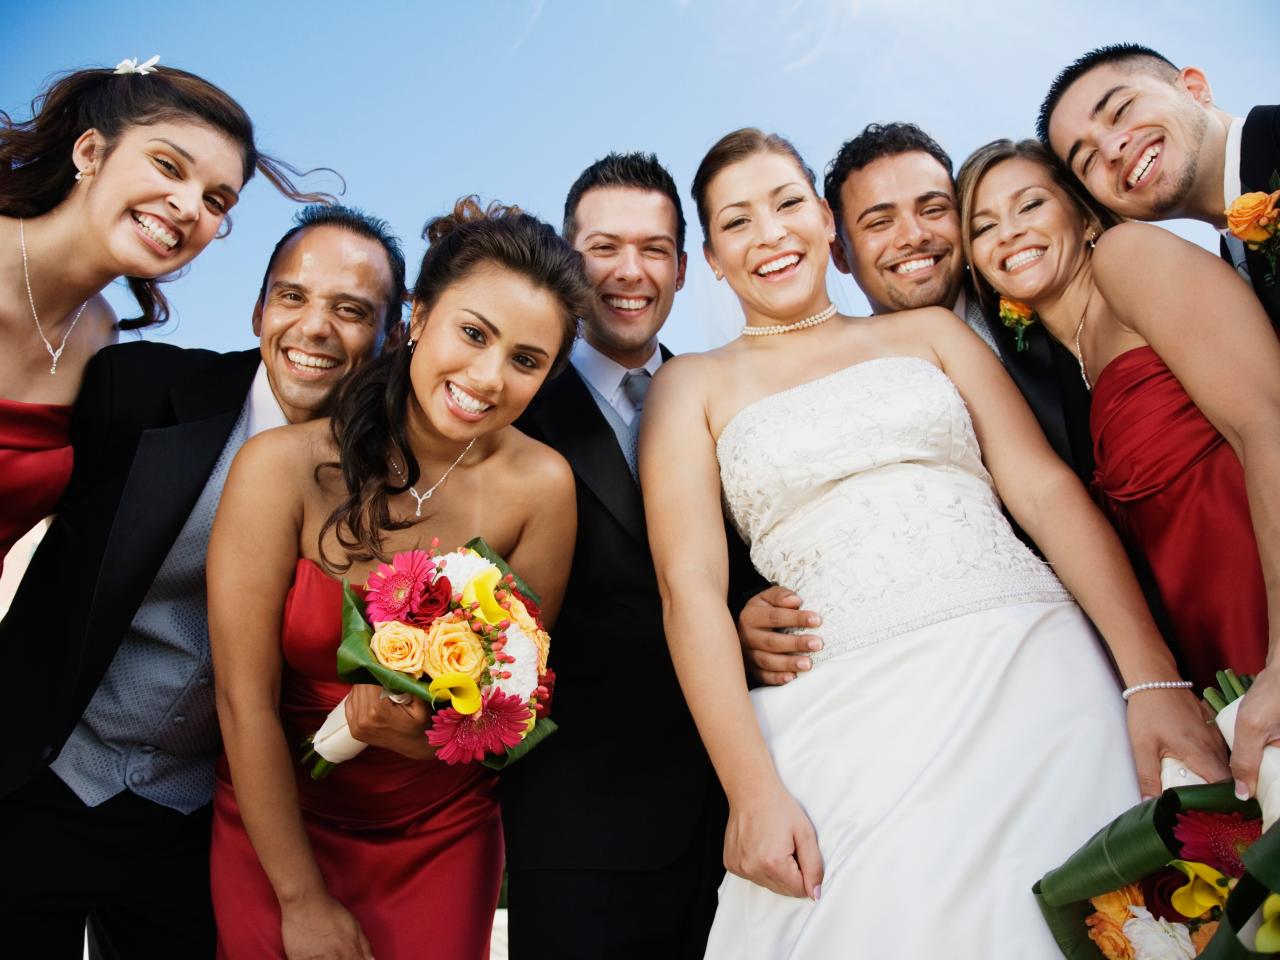 Bridesmaids and bridal party tips: What I wish I knew before planning my  wedding